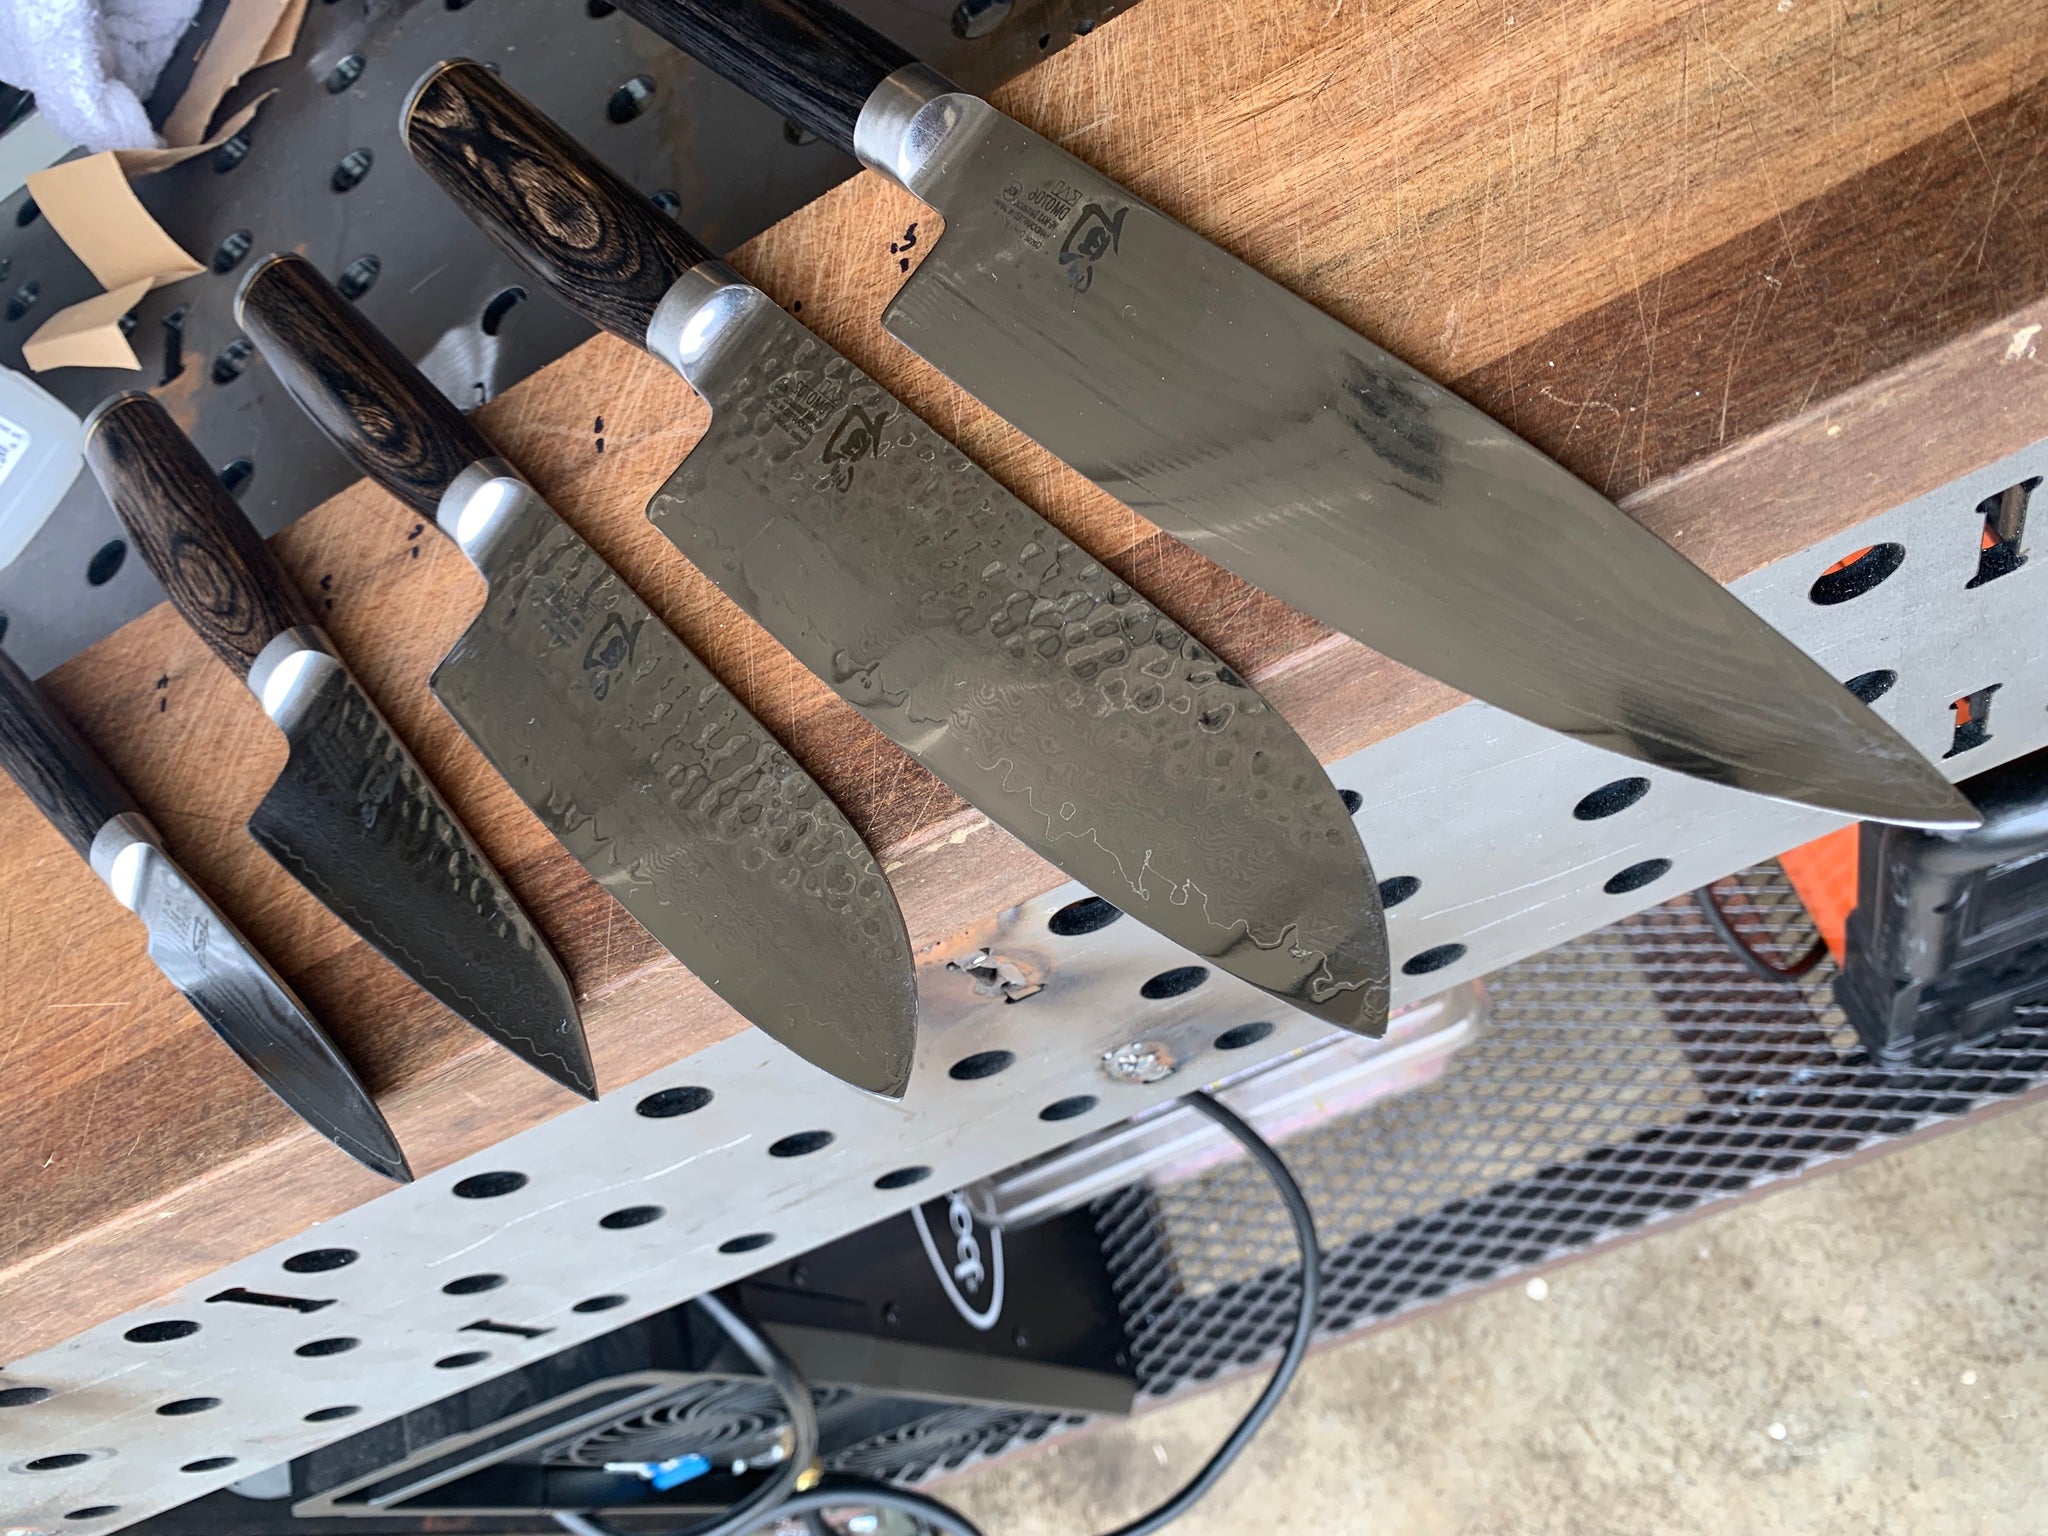 Knife Sharpening by the inch - $3.00 per inch